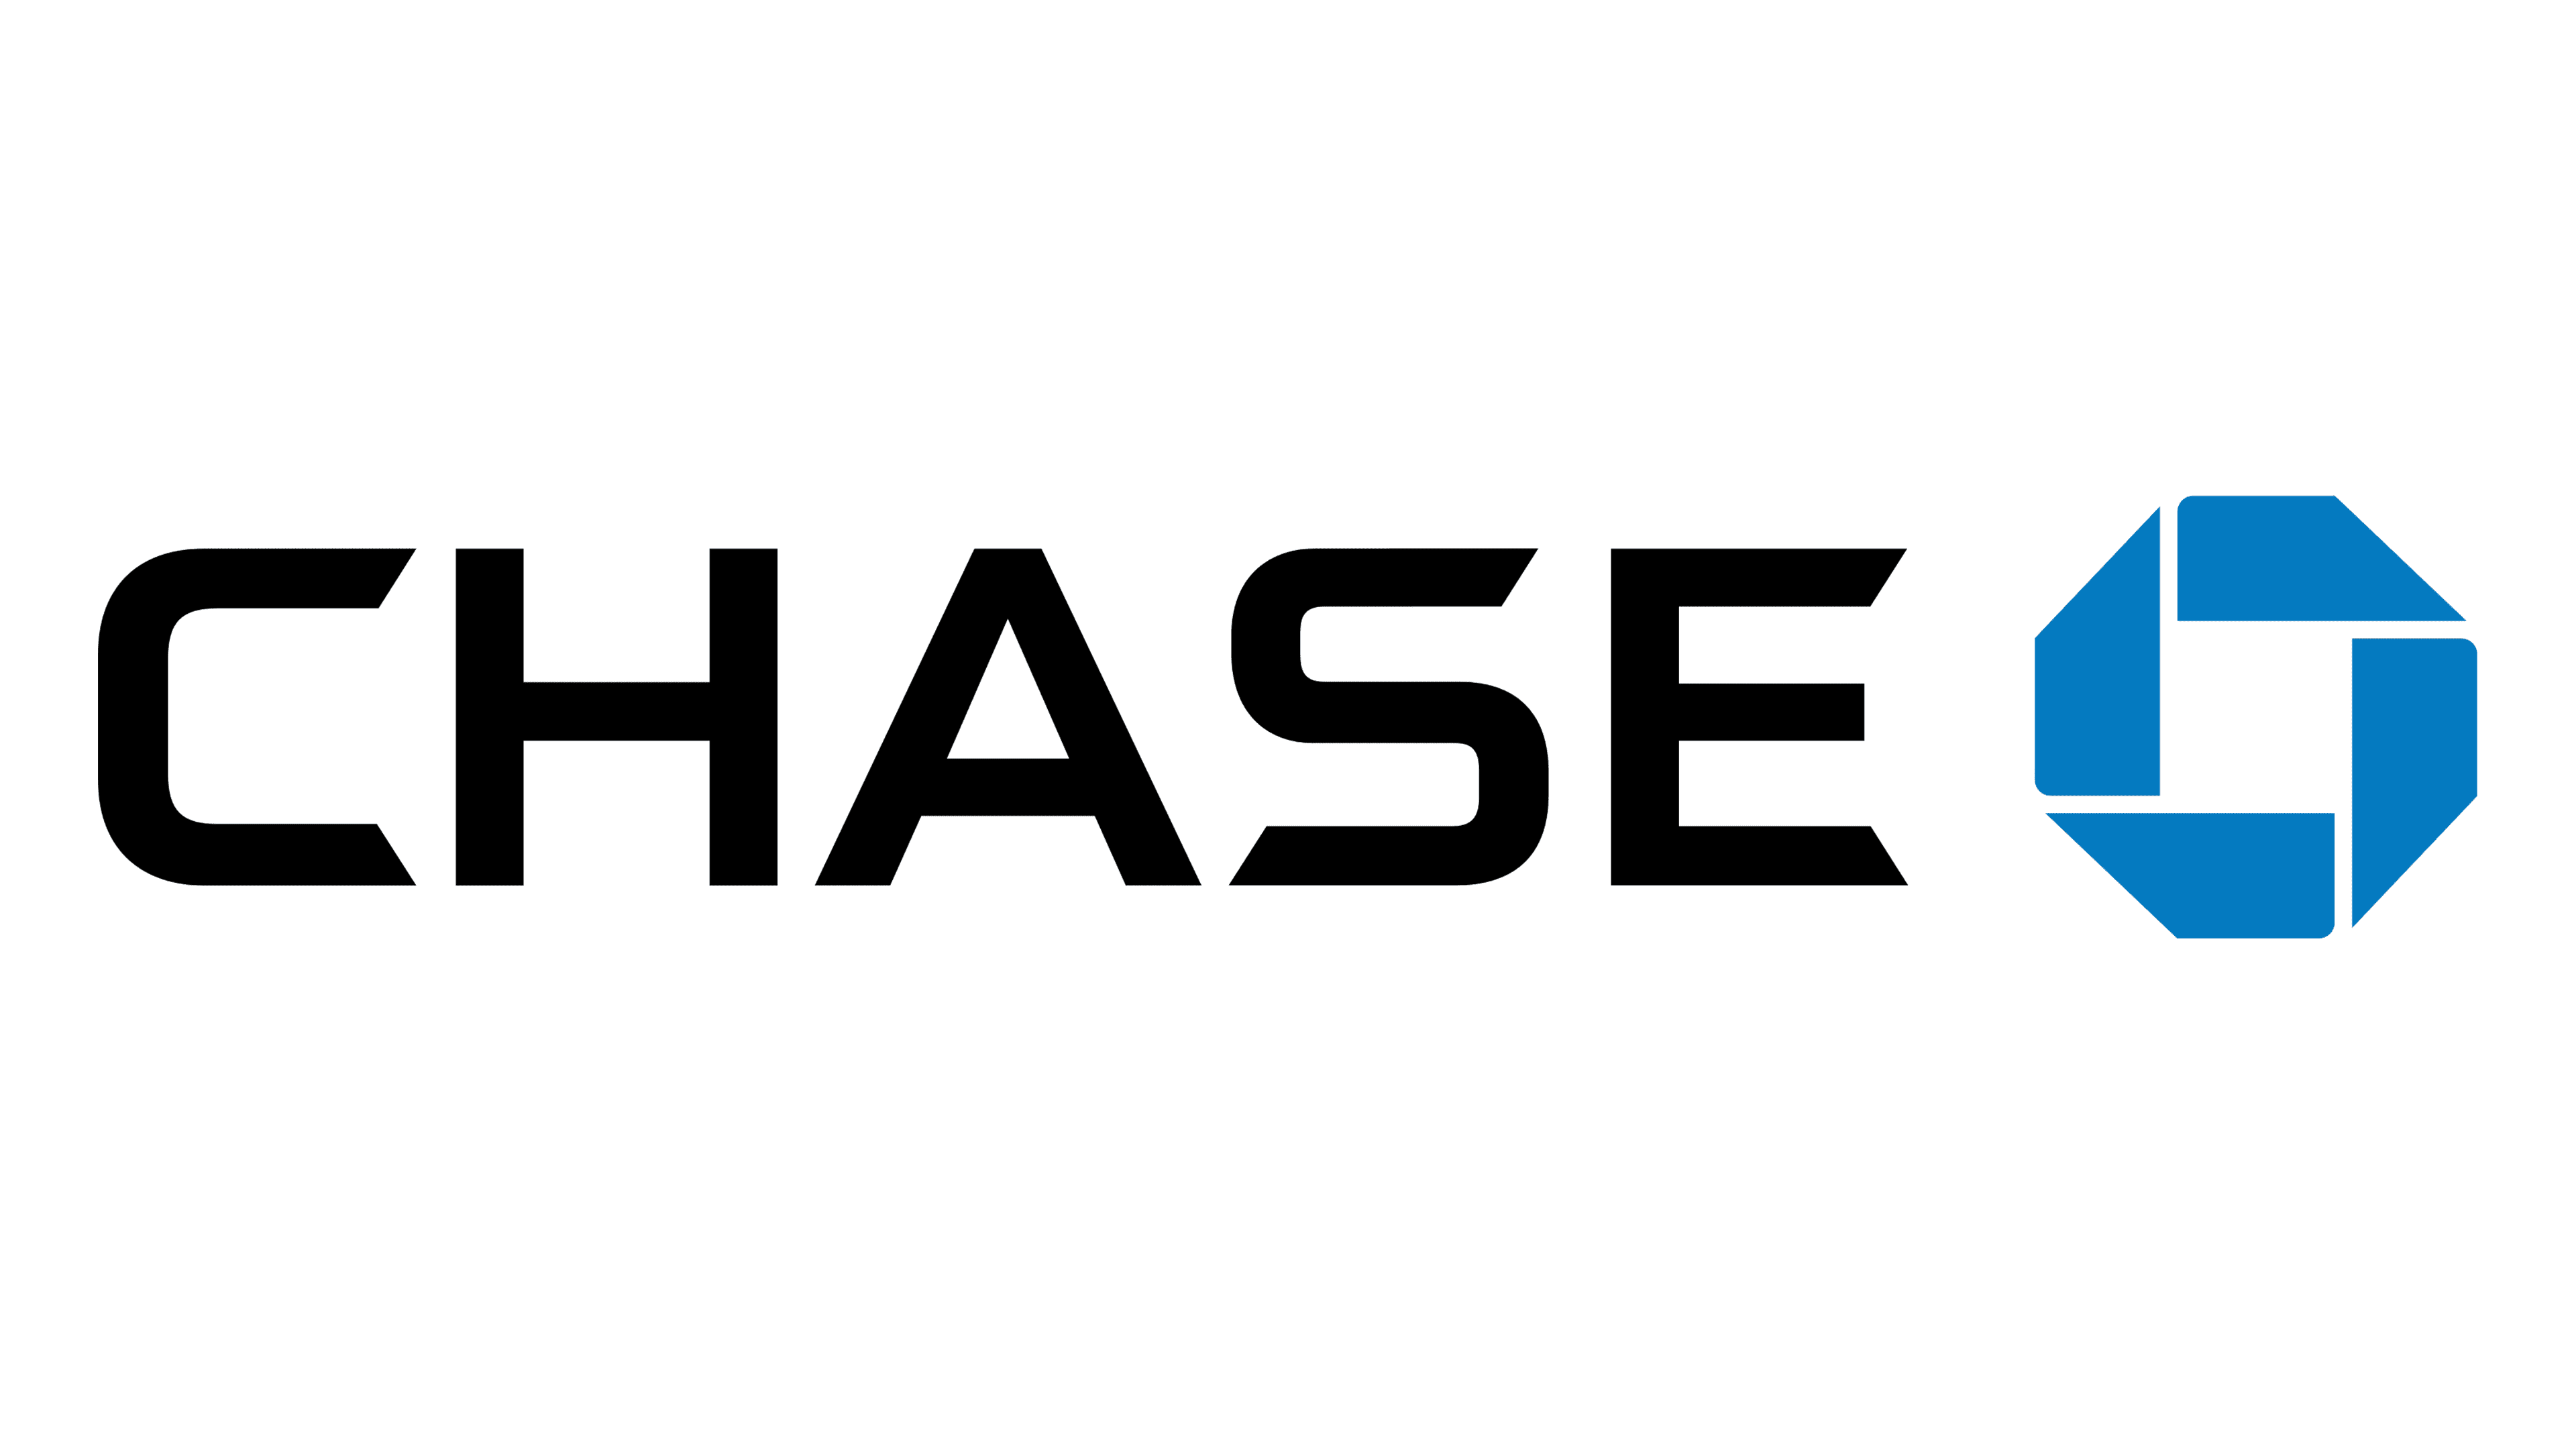 Chase Total Checking®: Earn $300 When You Open a New Account With Qualifying Activities